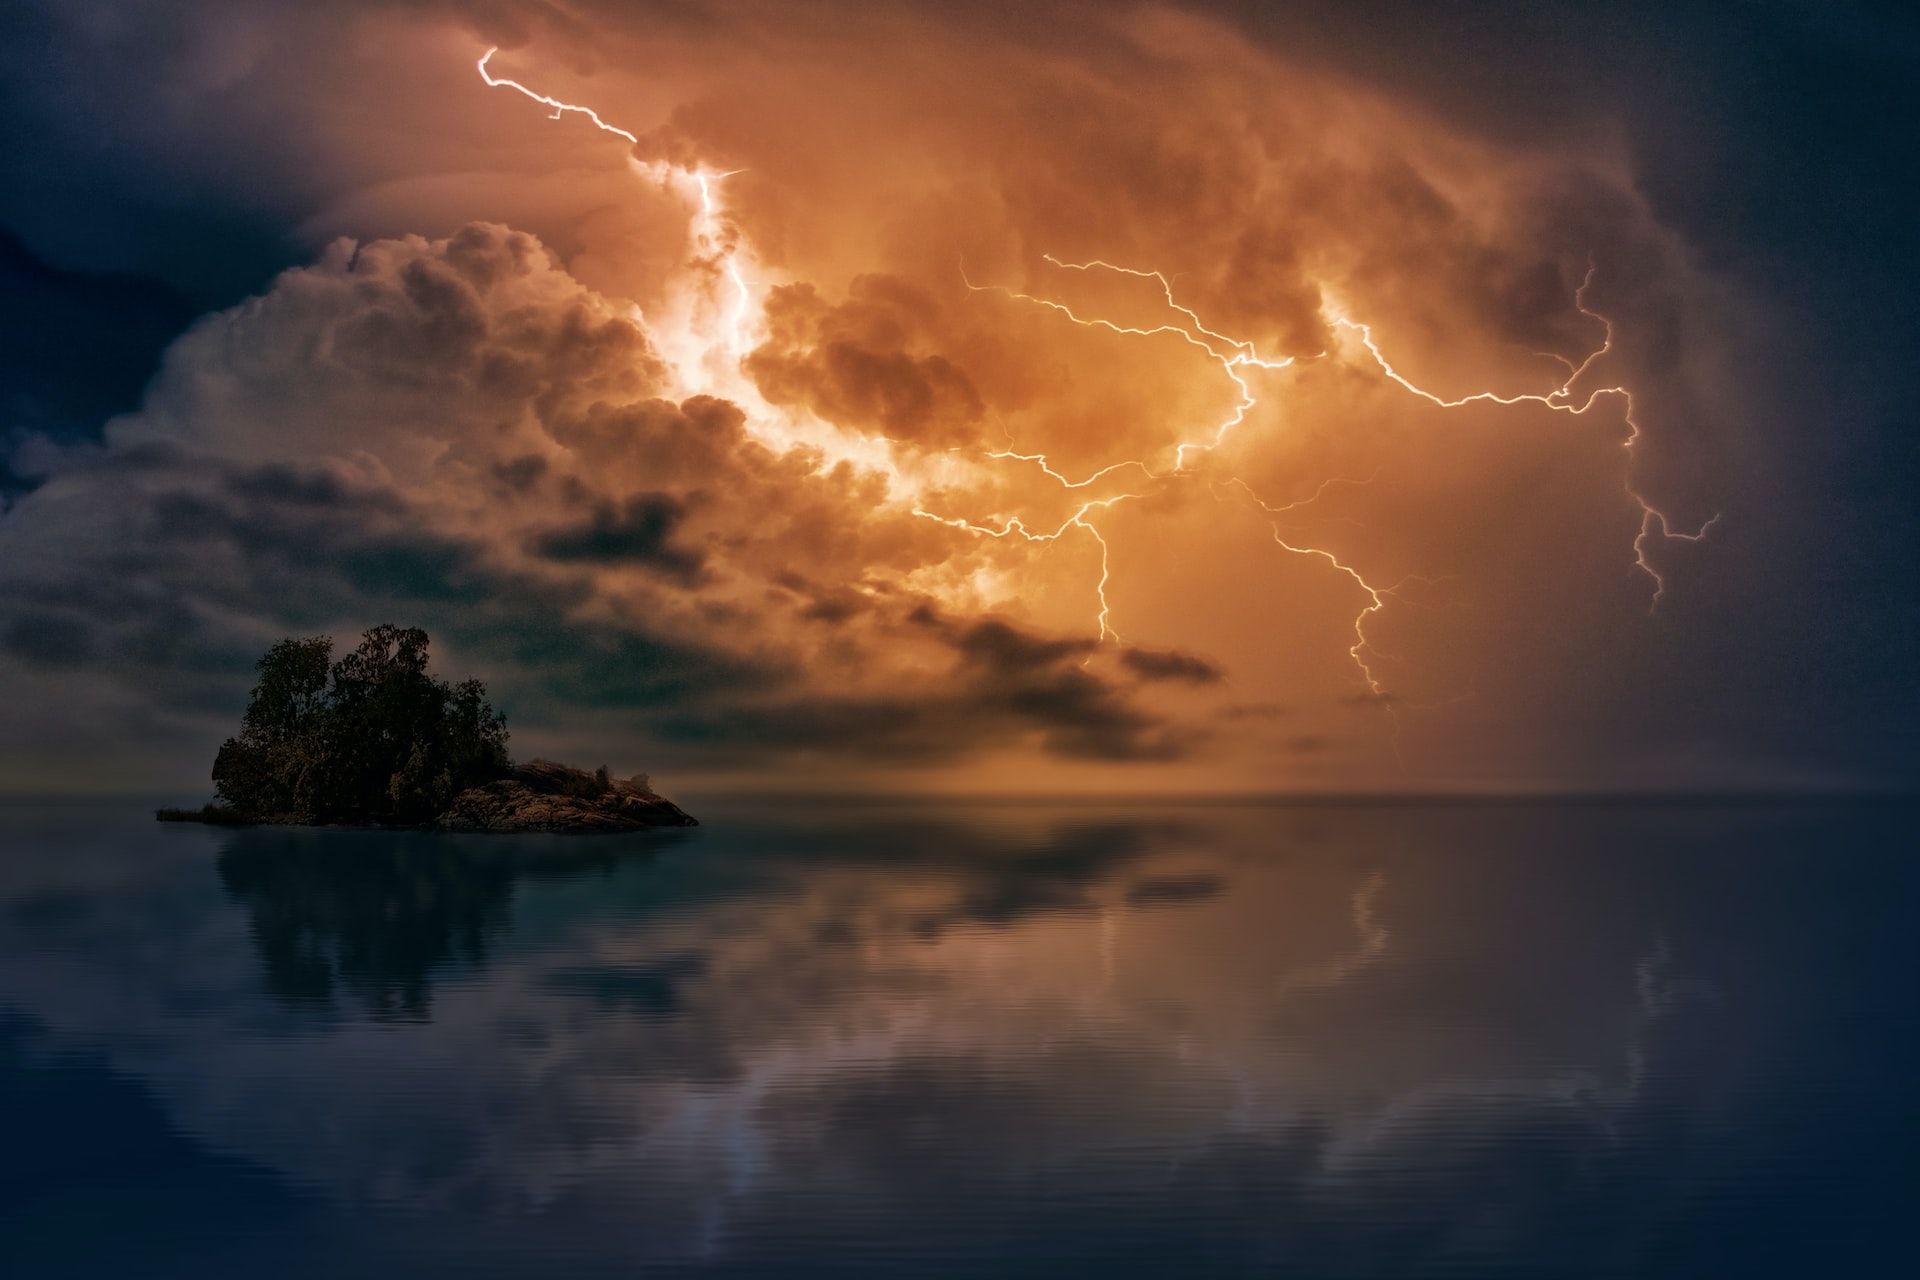 Lightning striking over the ocean and a small island